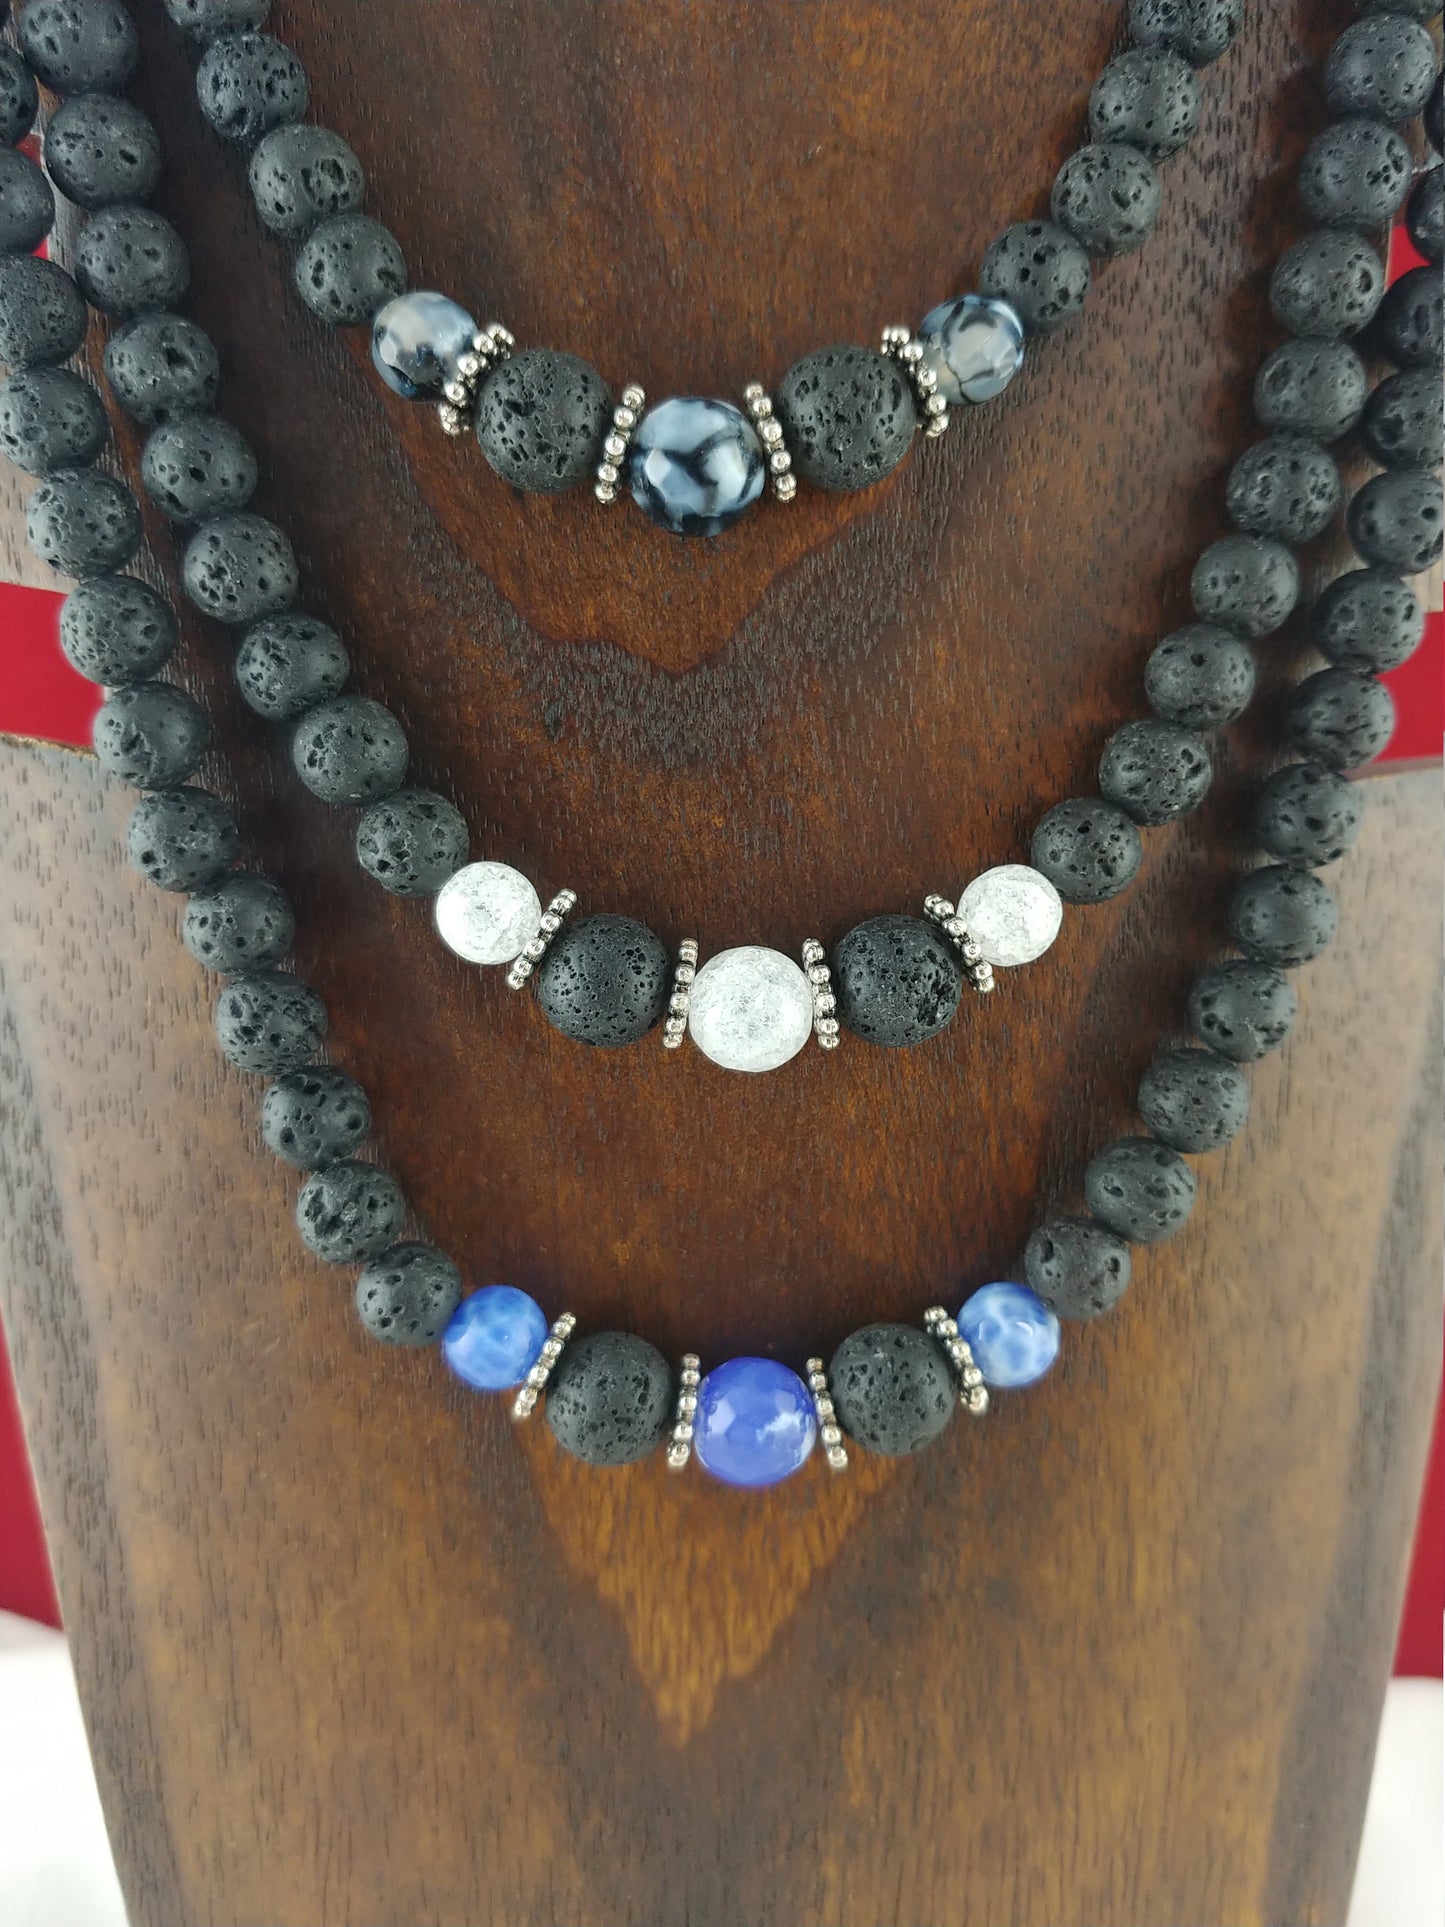 Grand Lava Necklace with Gemstones - 3 Types of Gemstones to select from